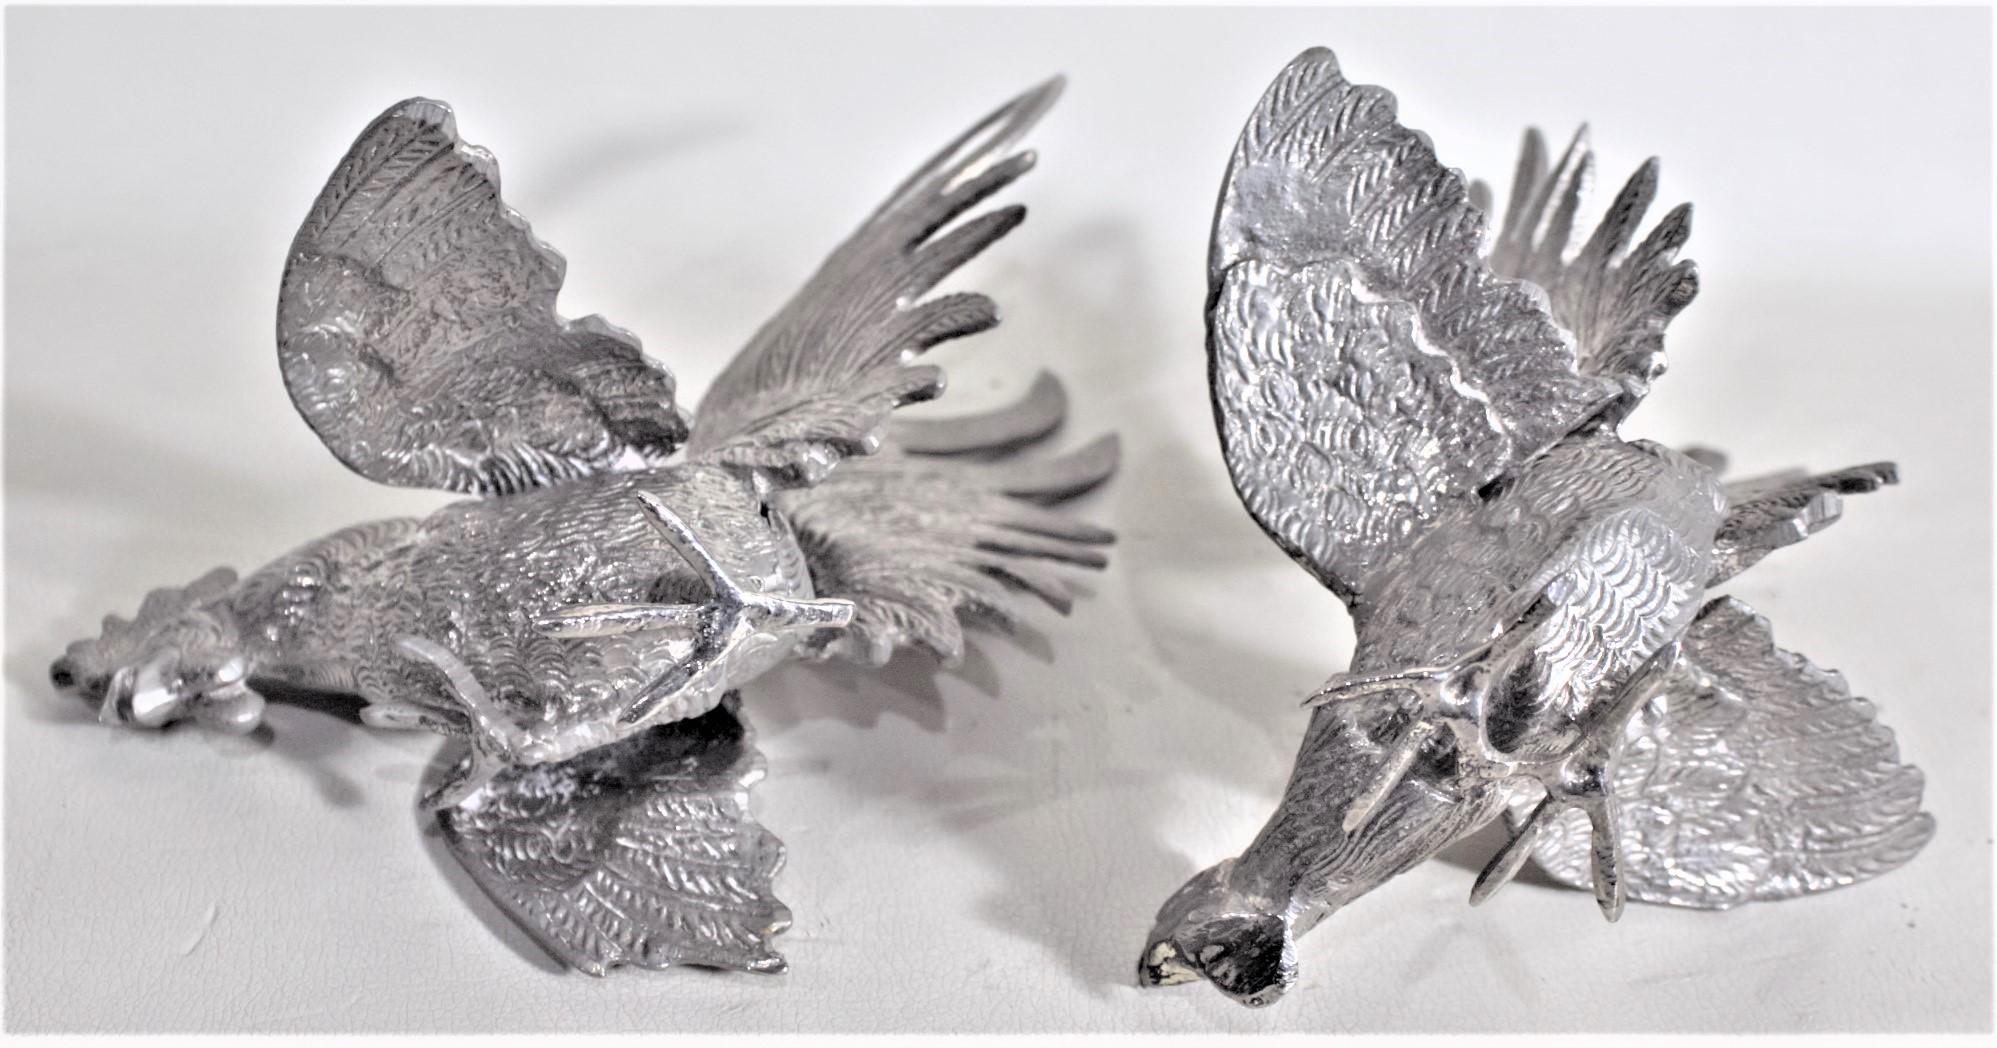 Pair of Ornate Silver Plated Fighting Rooster or Cockerel Table Sculptures In Good Condition For Sale In Hamilton, Ontario